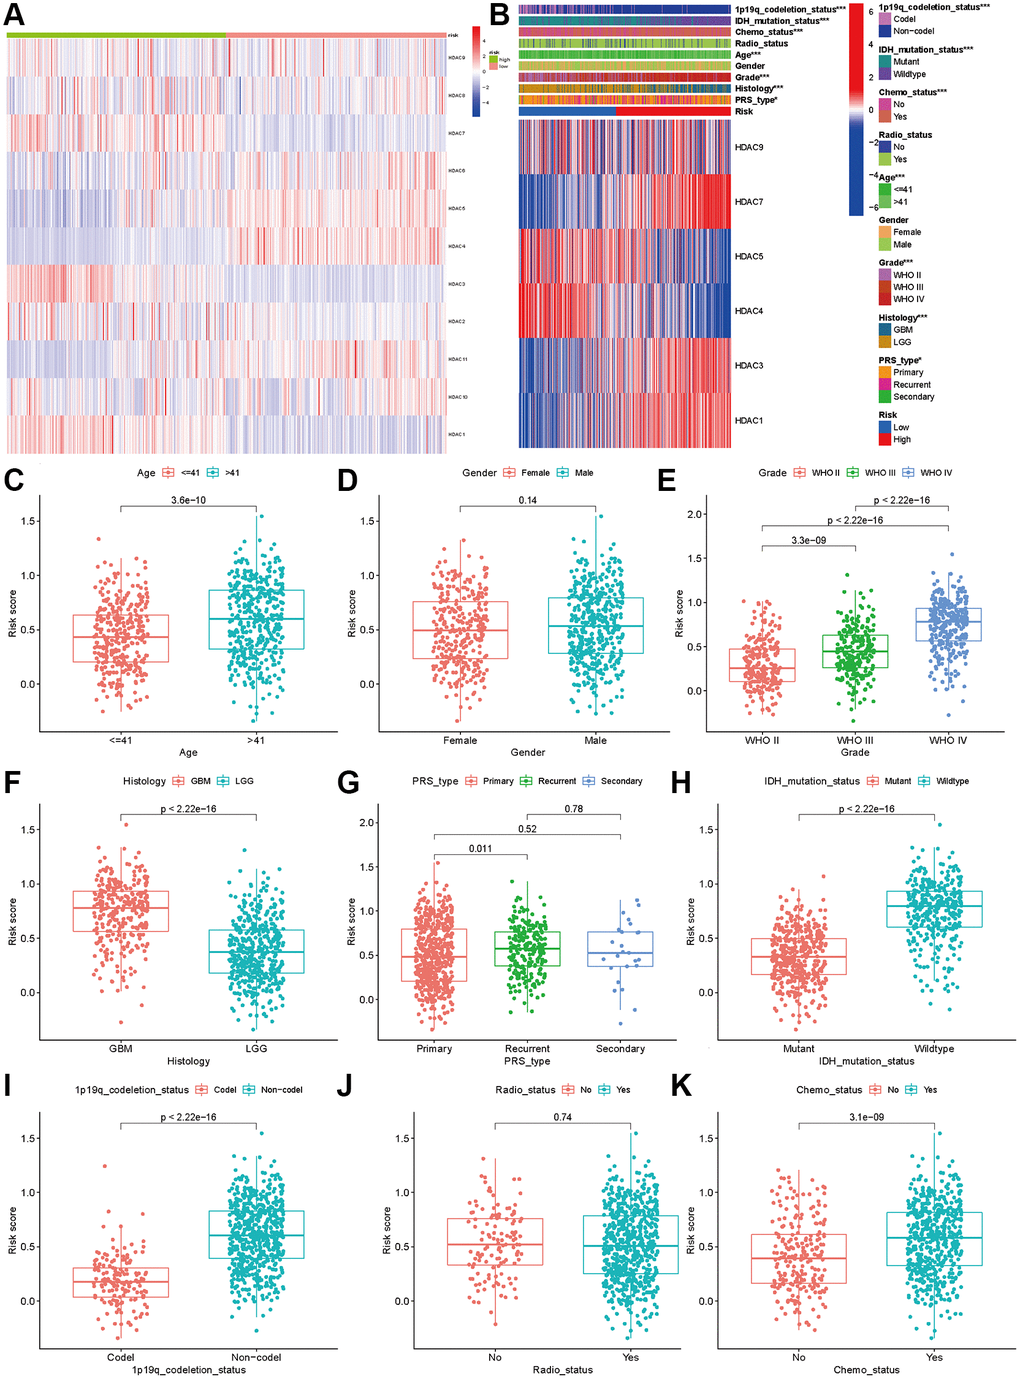 Association between HDAC genes and clinical characteristics in glioma patients. (A) Heatmap indicated the expression of HDAC genes between two subclasses. (B) Heatmap of associations among risk stratifications and clinical parameters and six HDAC genes expression. Comparisons of risk score among different clinical parameters: (C) age (>41 vs. ≤41), (D) gender (male vs. female), (E) WHO stage (II, III, IV). (F) histology (LGG vs. GBM). (G) PRS type (primary, recurrent, and secondary). (H) IDH mutation status (mutant vs. wild type). (I) 1p19q codeletion status (codel vs. non-codel). (J) radiotherapy status (No vs. Yes). (K) chemotherapy (No vs. Yes).